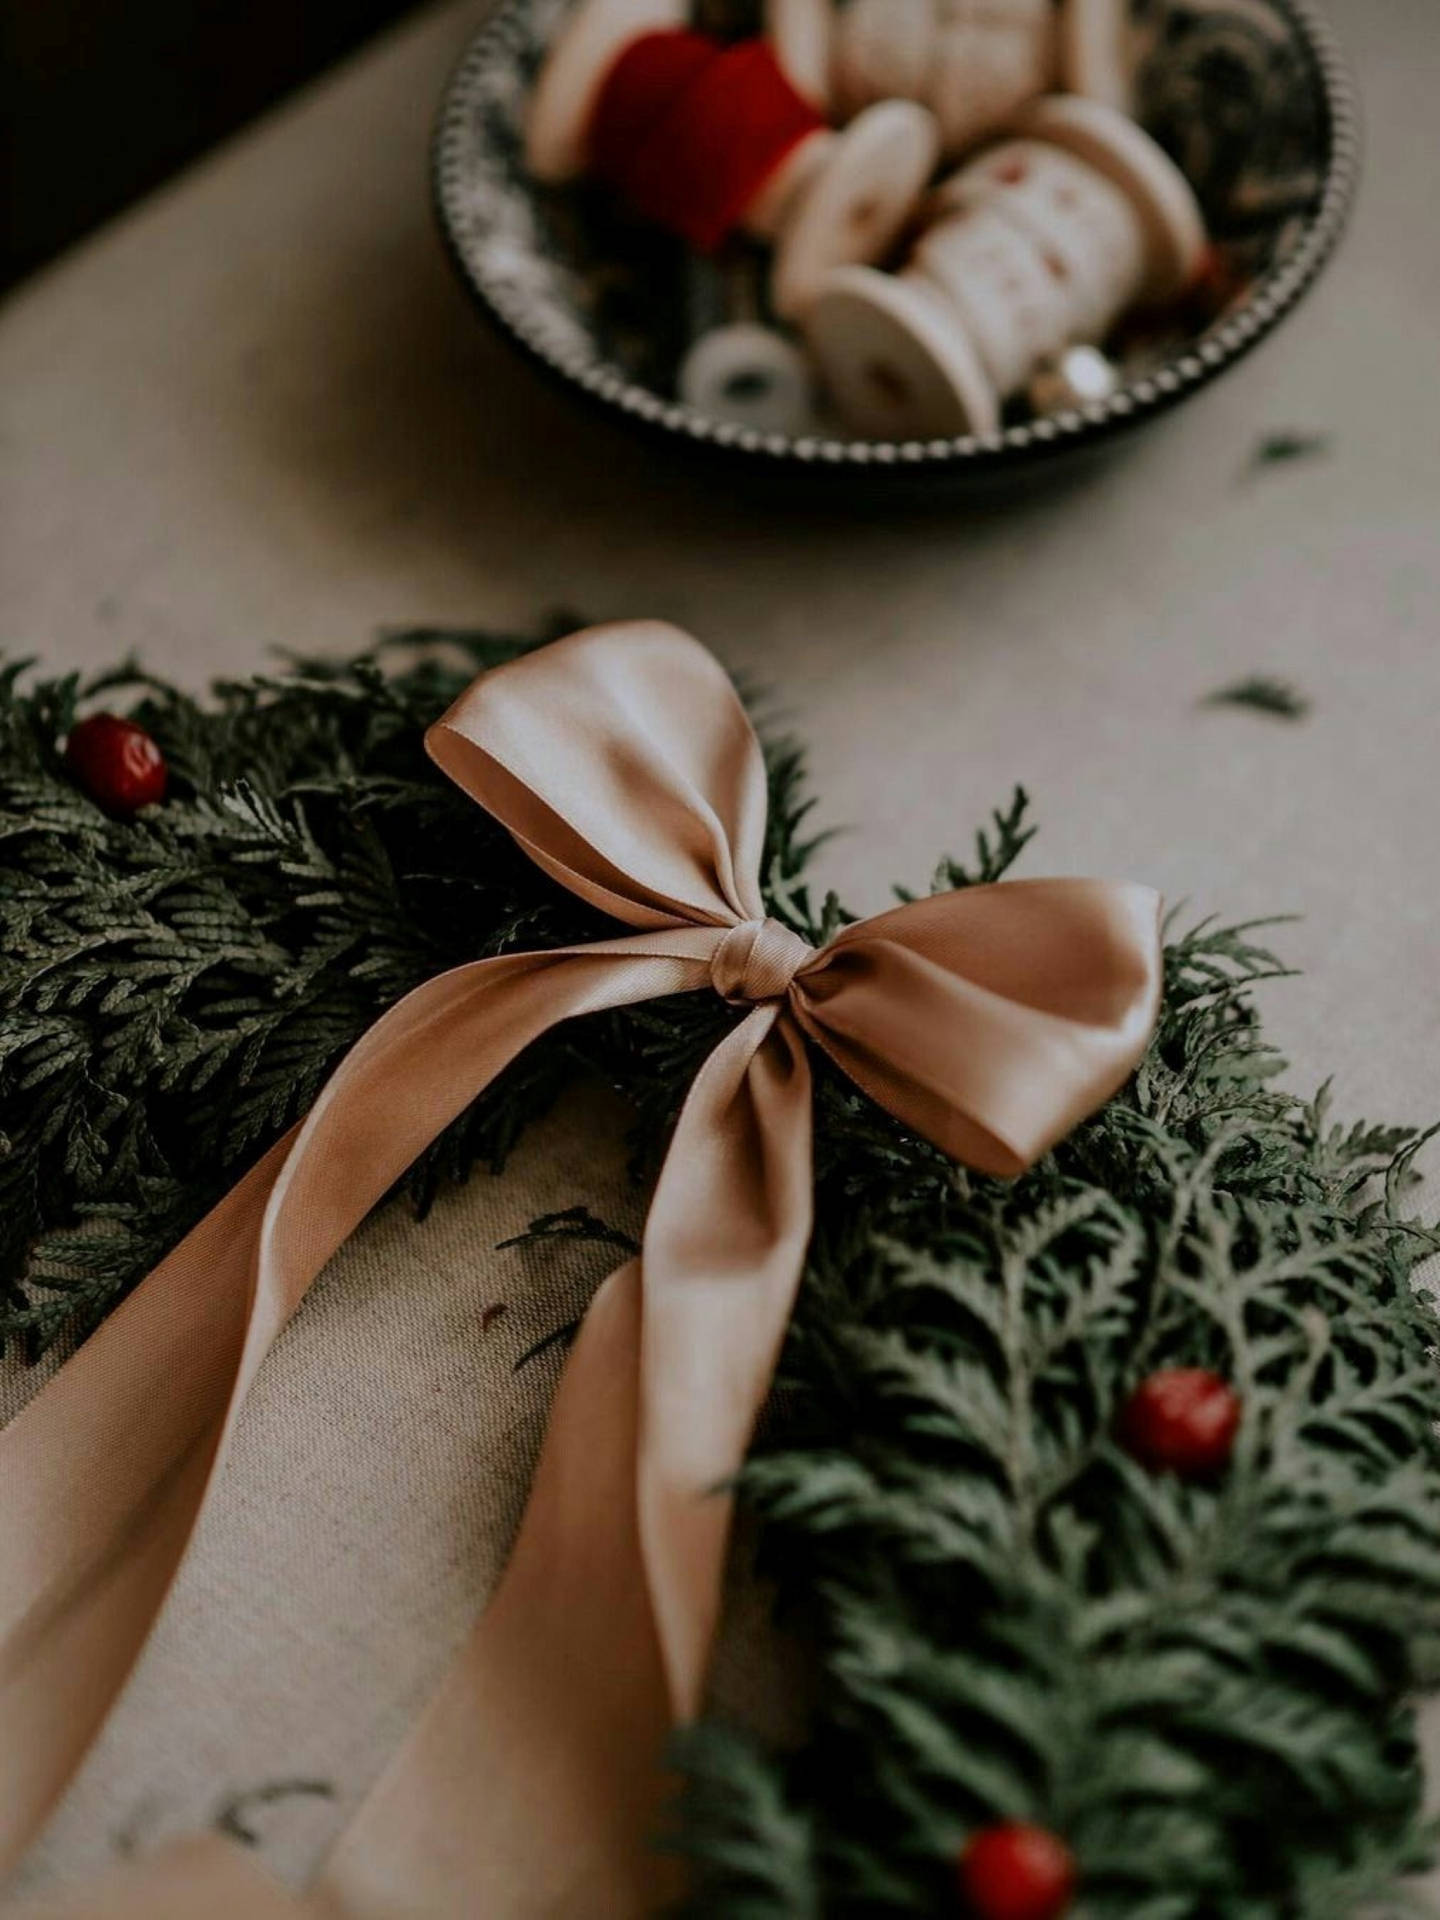 Festive Serenity: A Christmas Aesthetic Wreath Adorned With A Ribbon